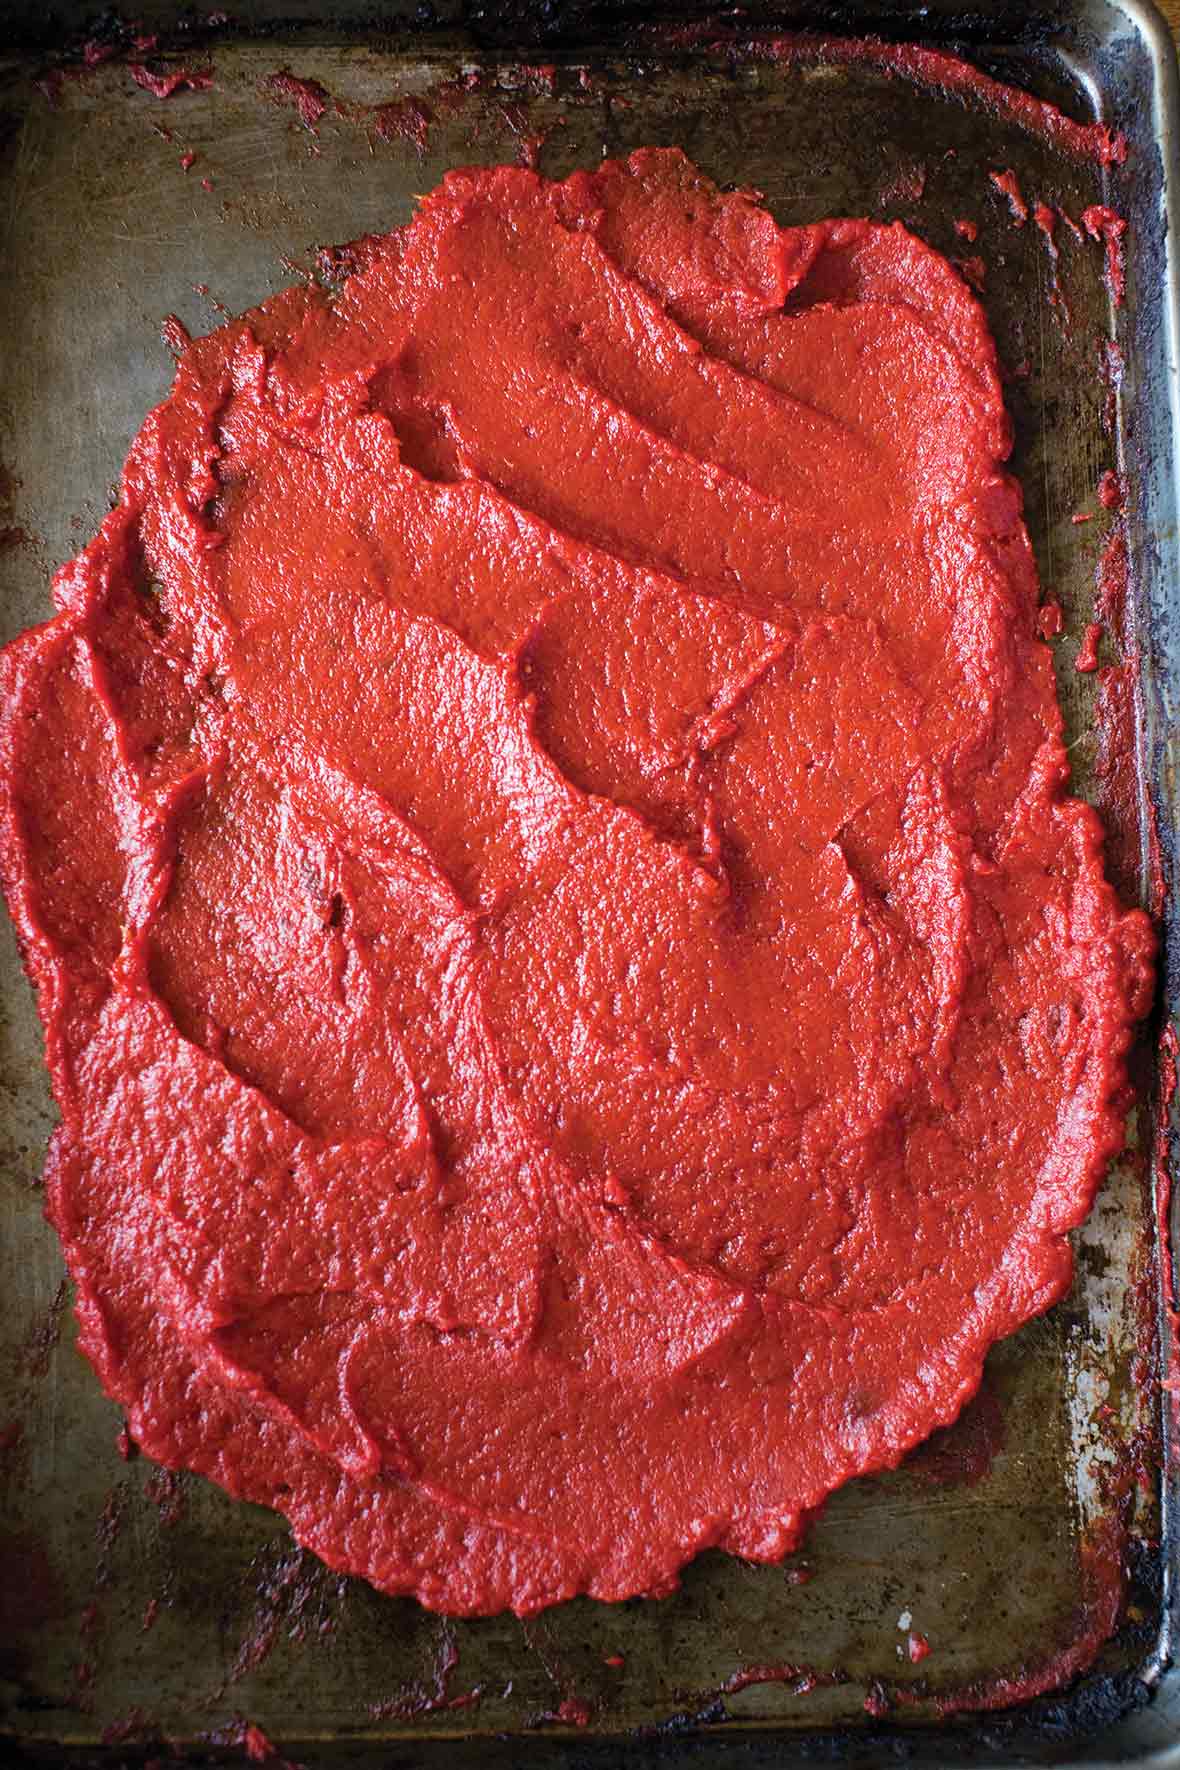 A rimmed baking sheet spread with a thick layer of homemade tomato paste.